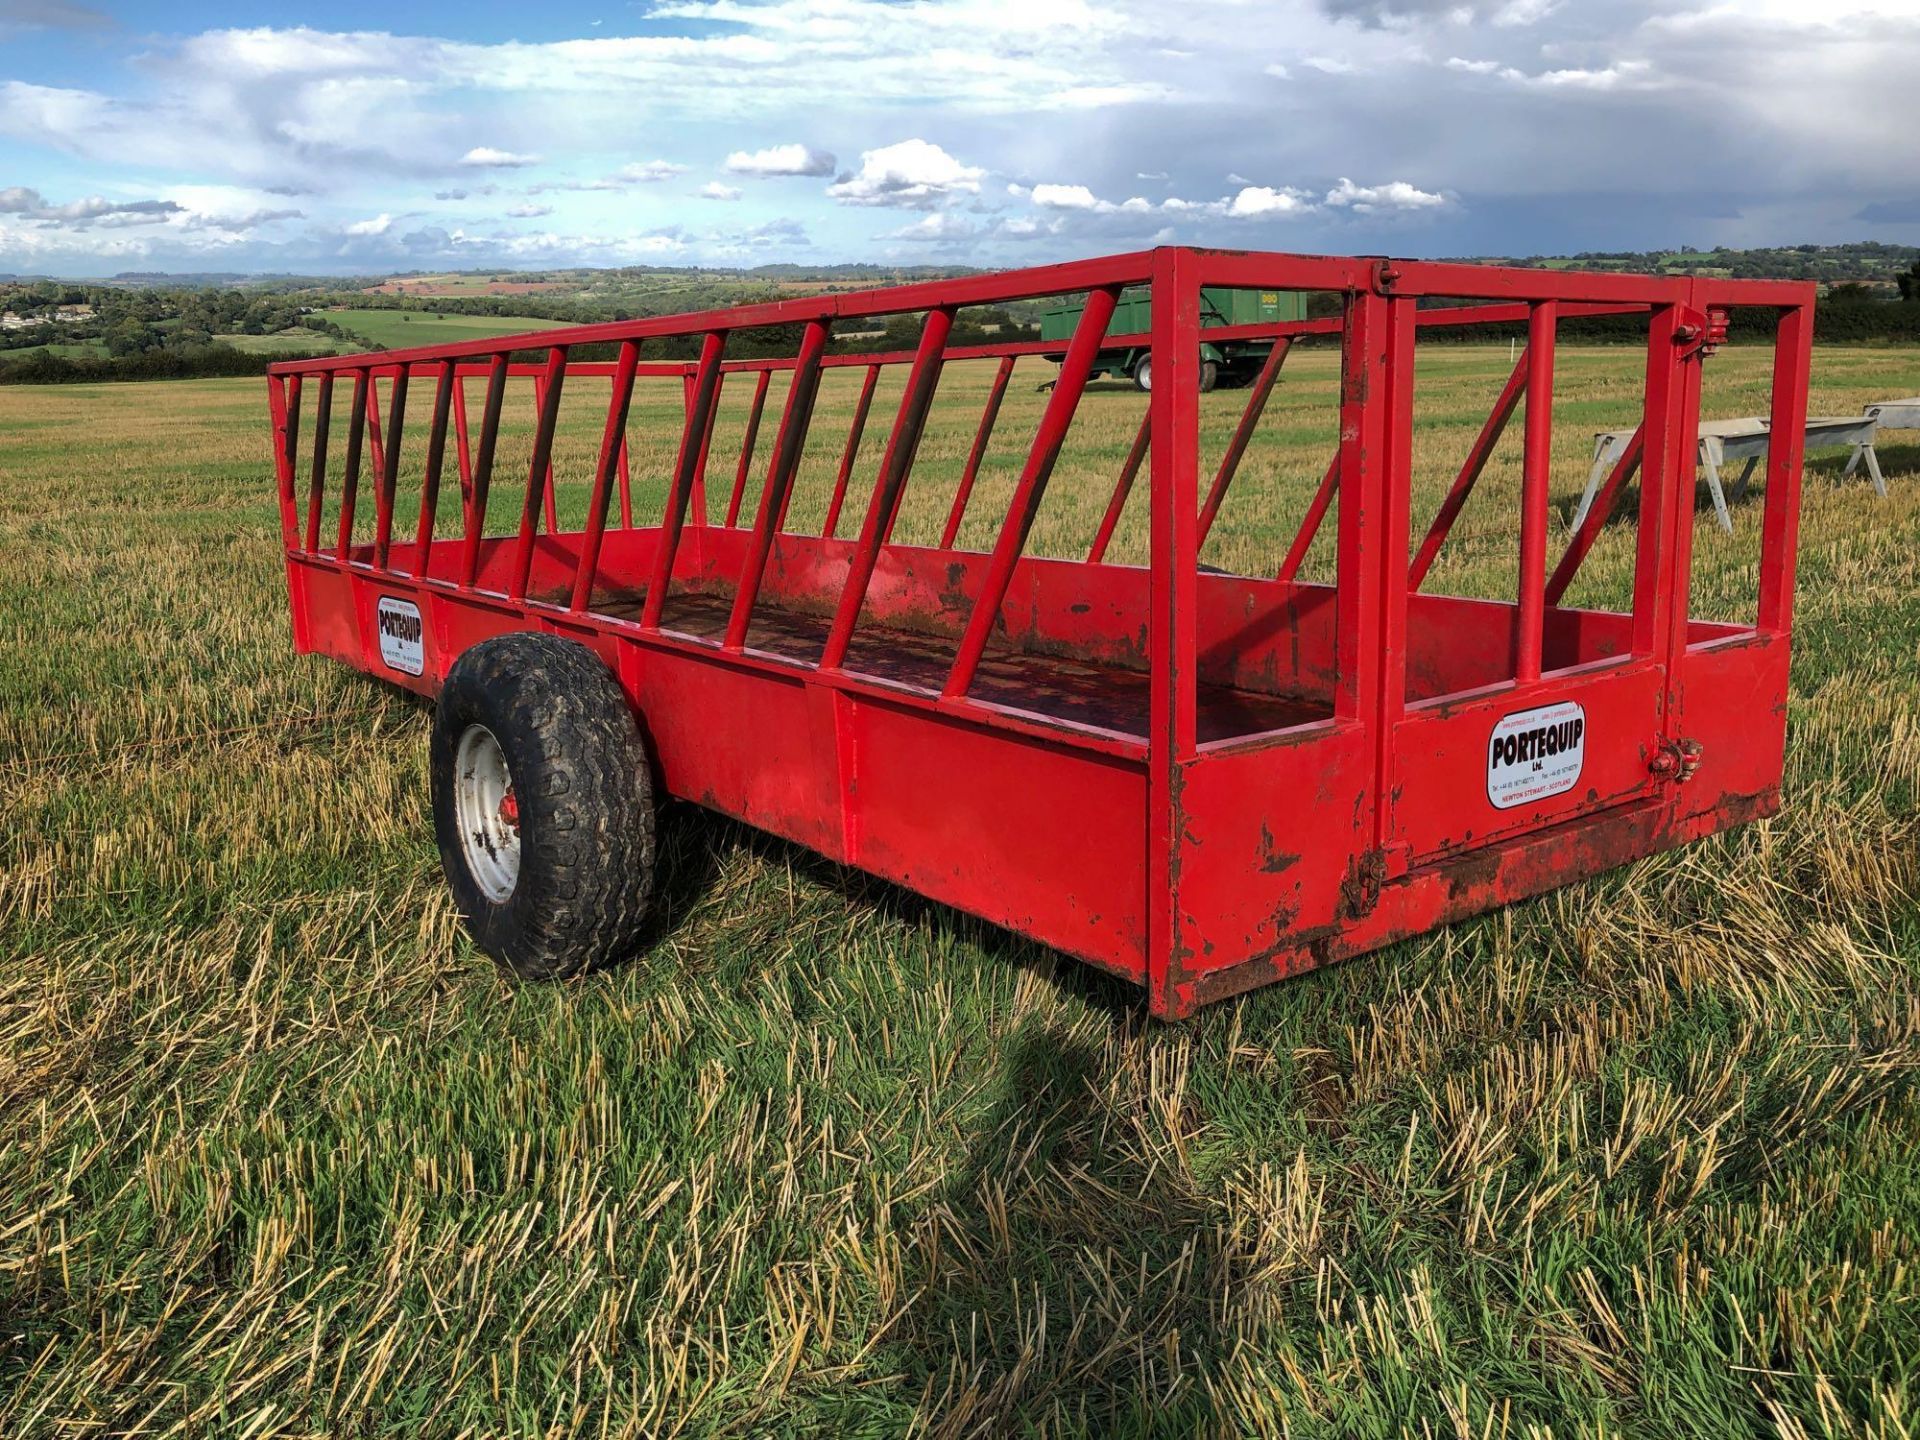 Portequip 16 x 16 solid floor trailed silage feeder - Image 4 of 5